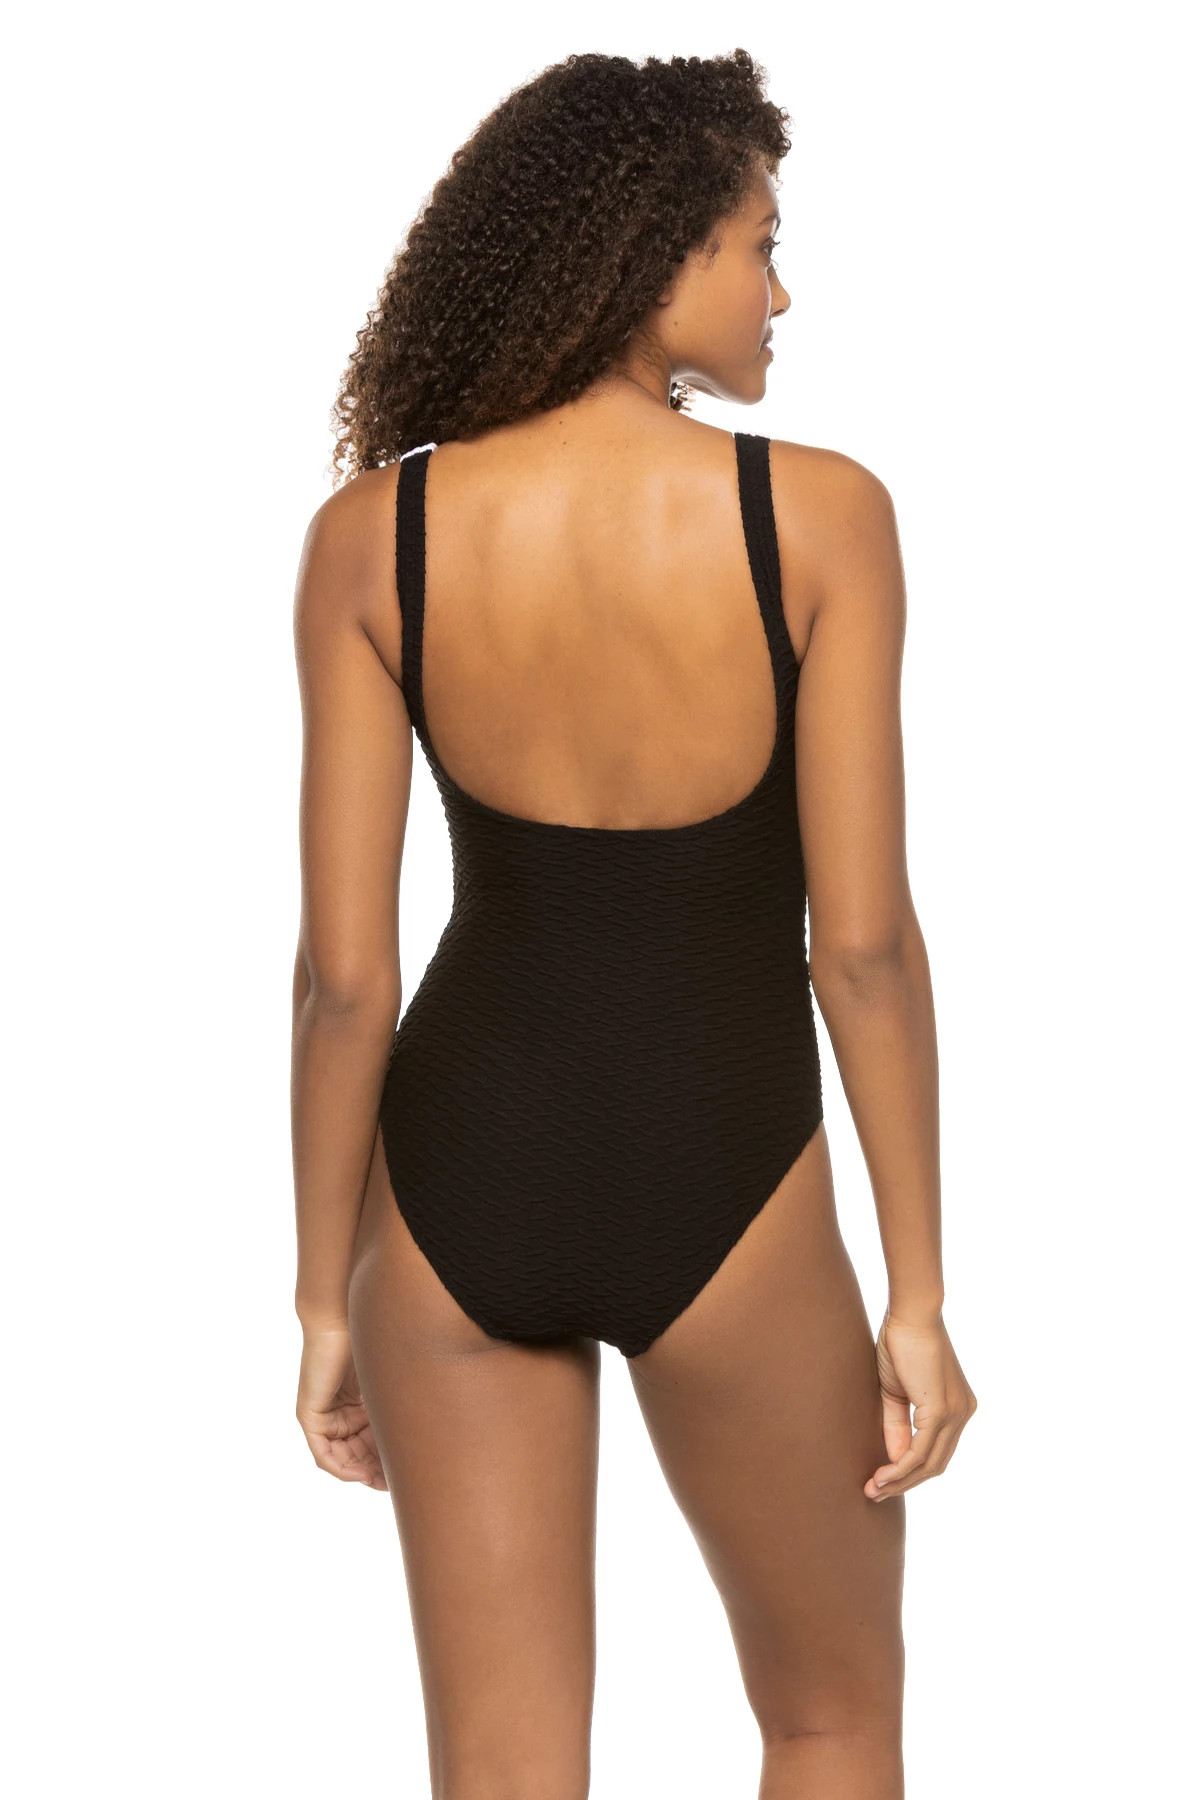 WHITE/BLACK/SAGE Color Block Textured One Piece Swimsuit image number 2